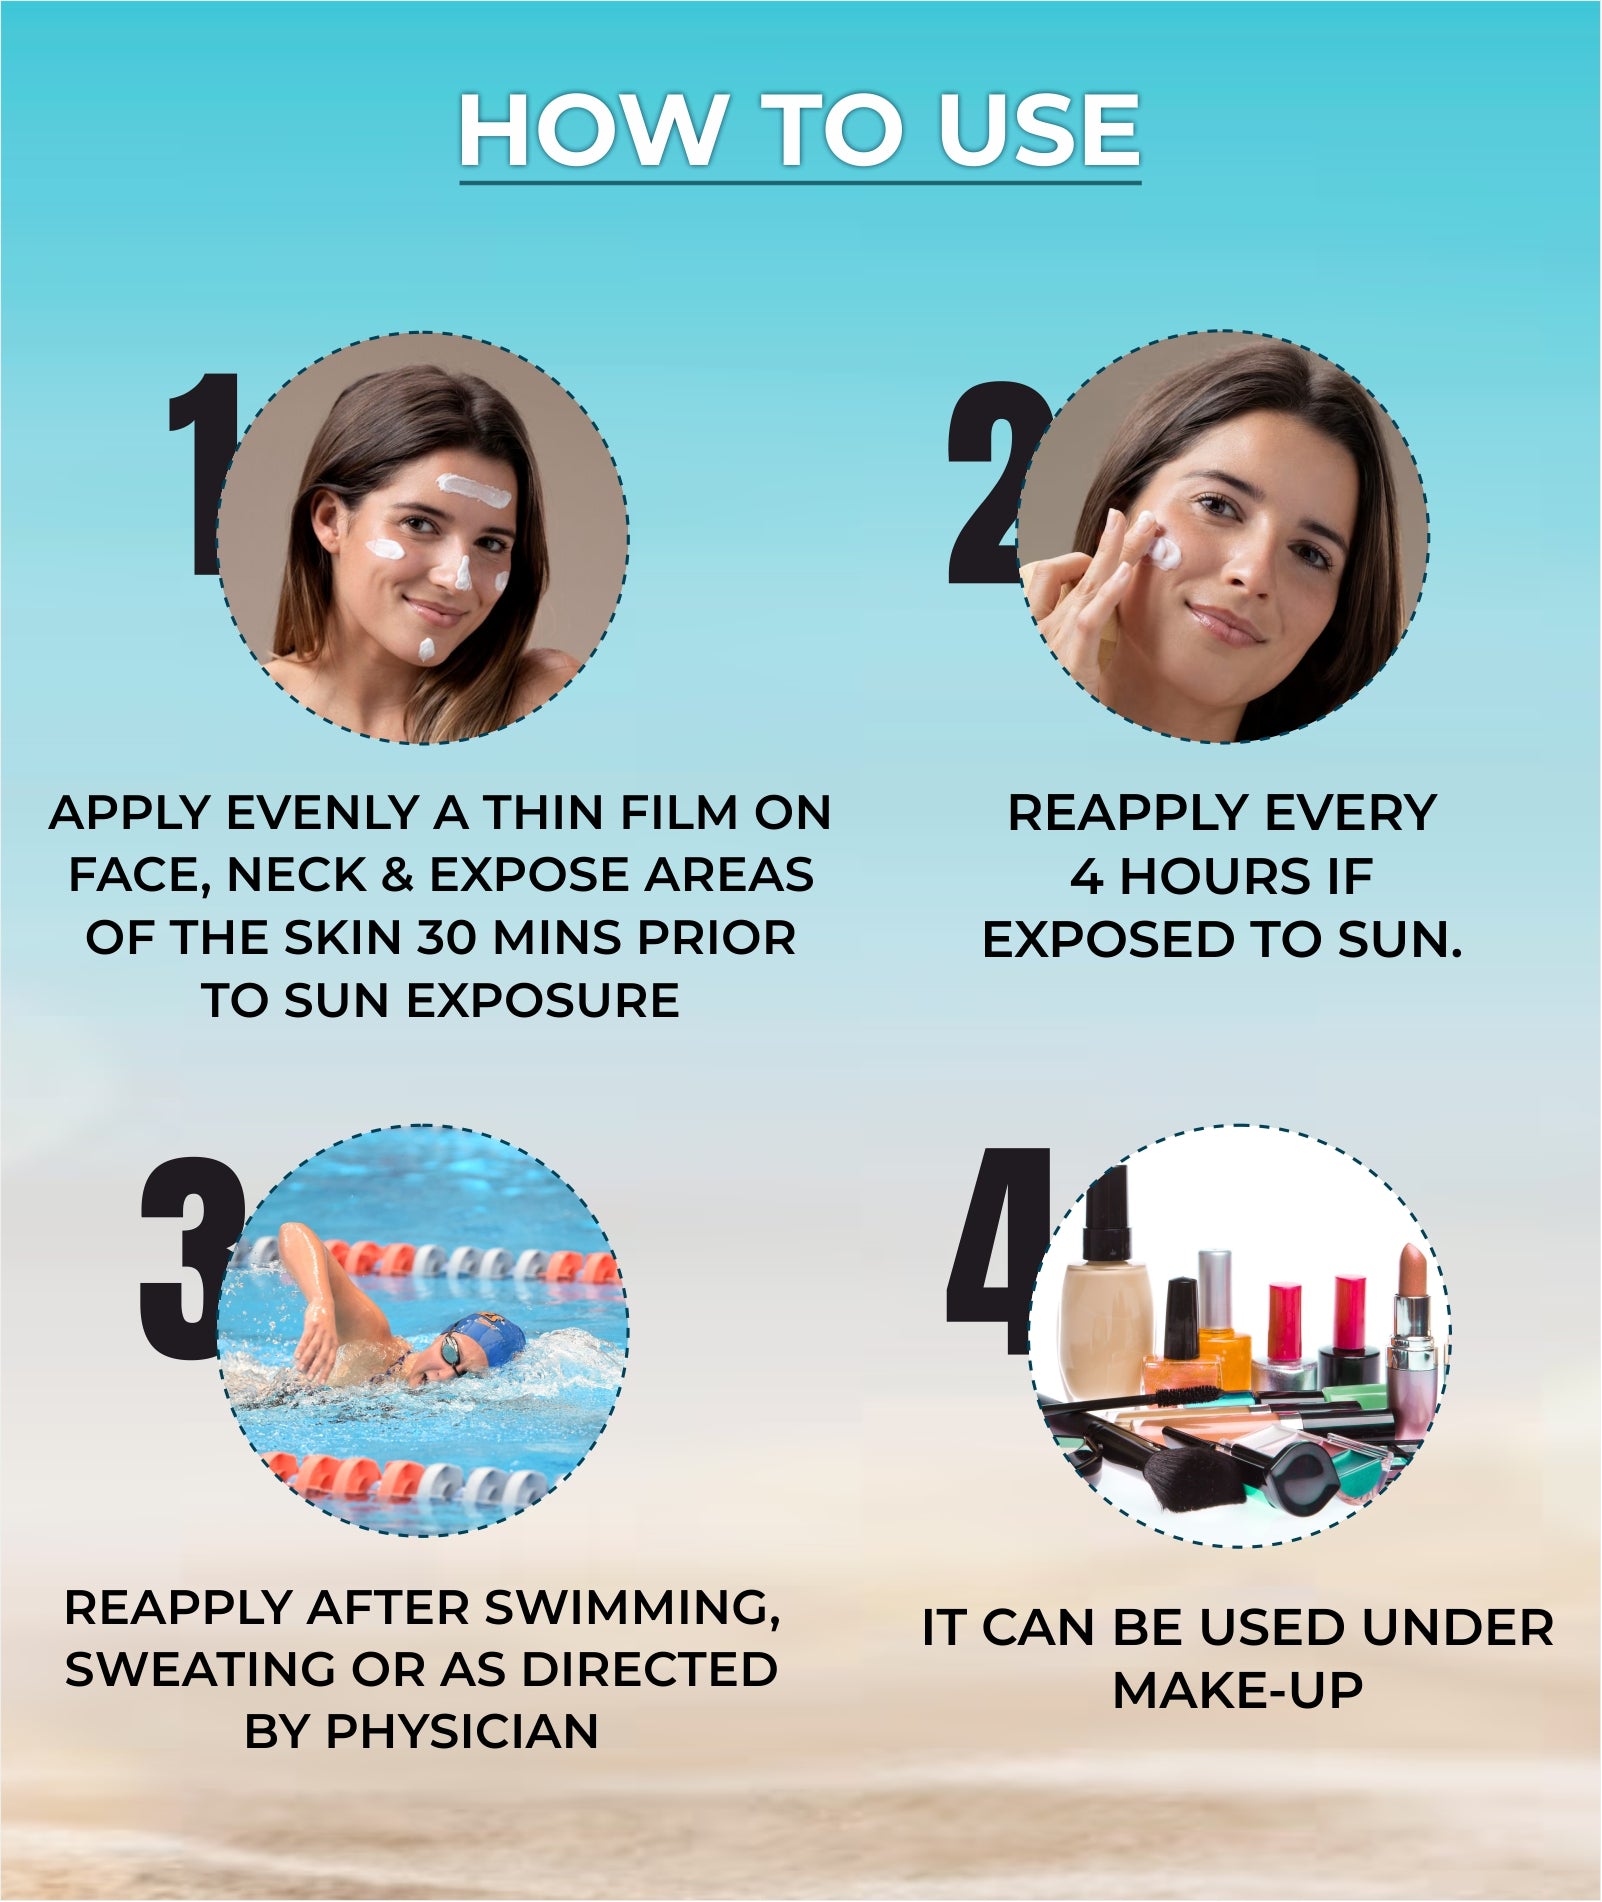 Steps Showing How To Use This SPF 30+ Sunscreen